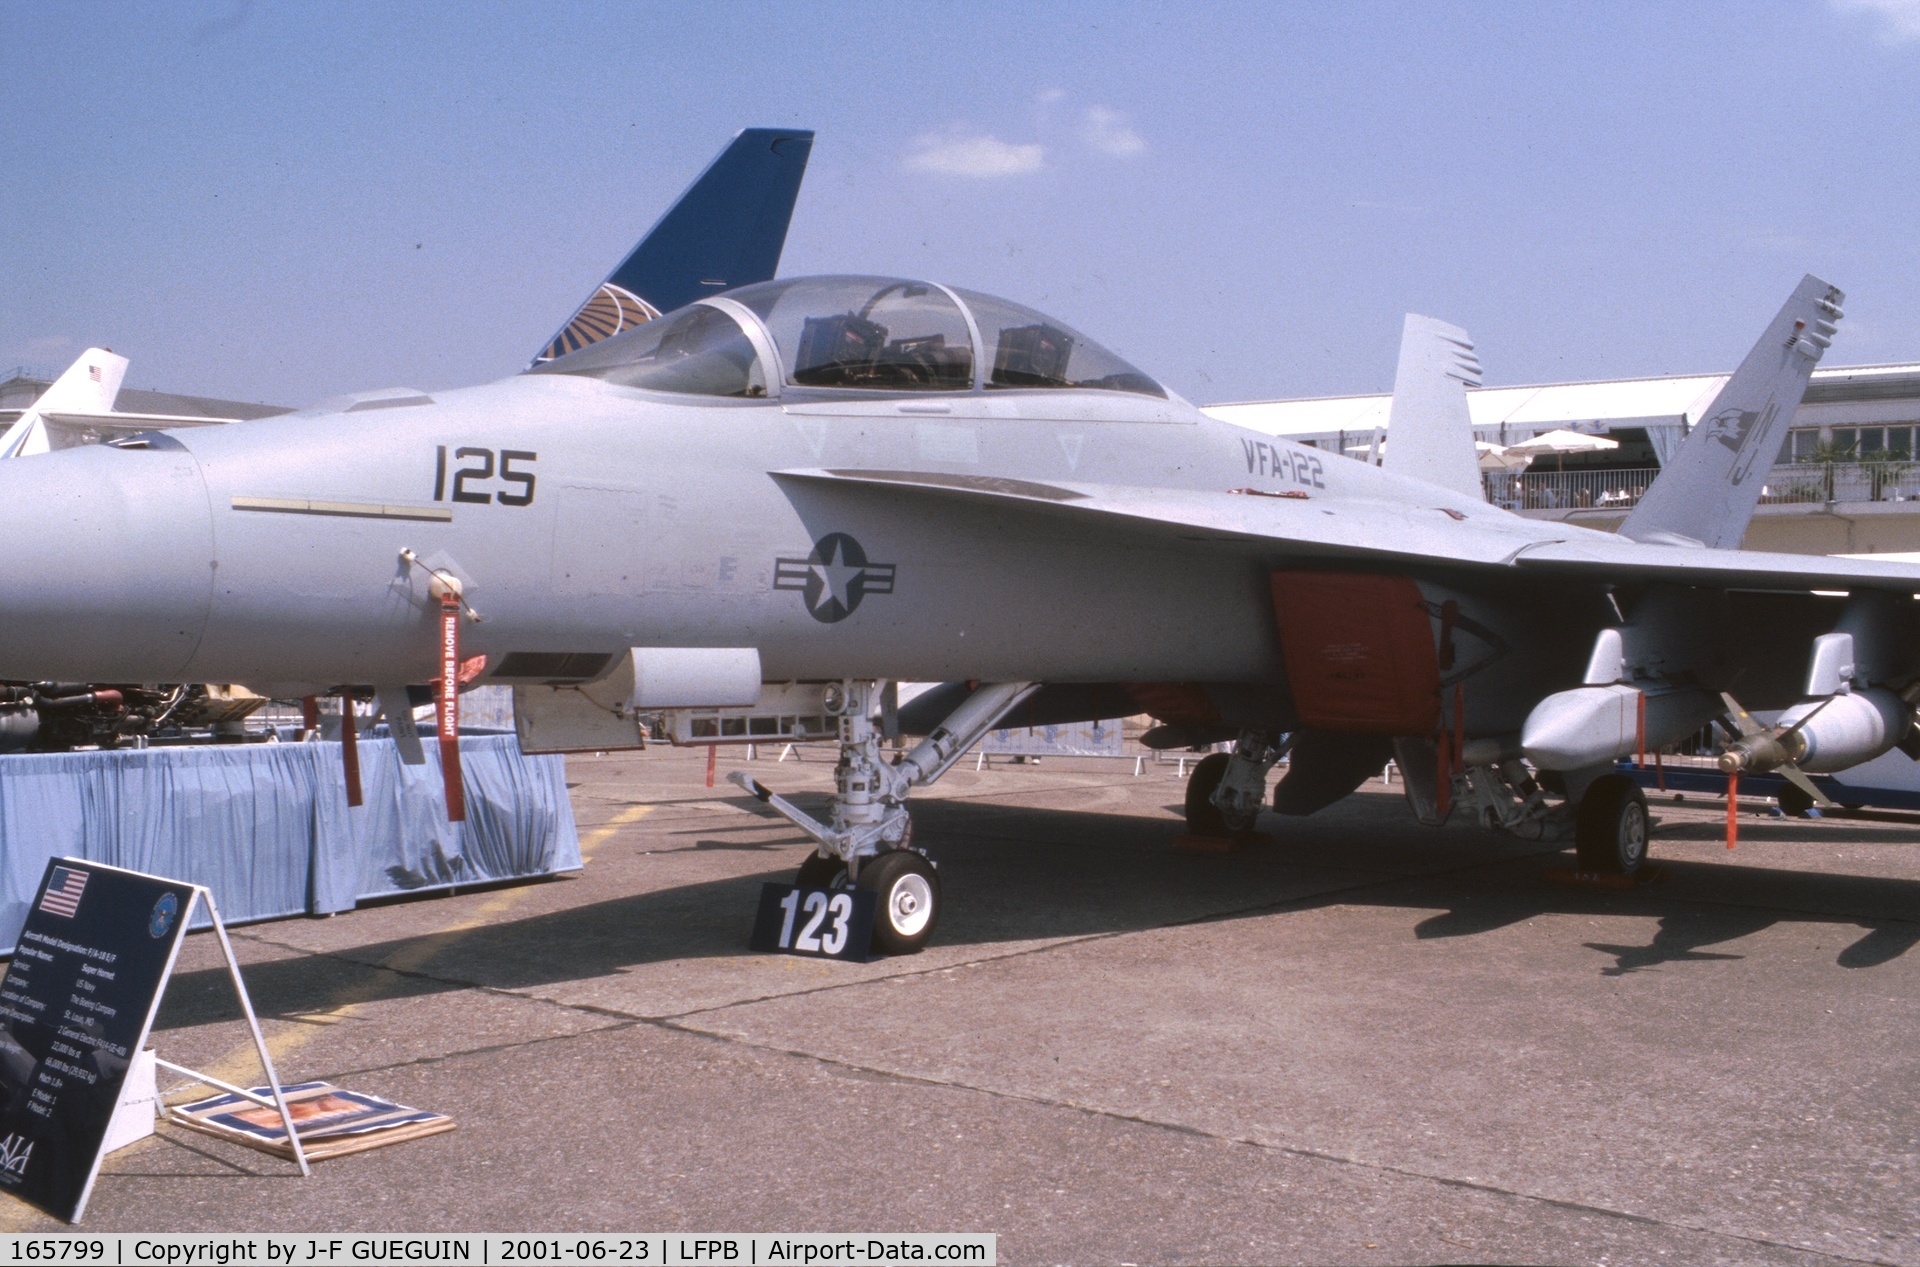 165799, Boeing F/A-18F Super Hornet C/N 1529/F025, On display at 2001 Paris-Le Bourget airshow as NJ-125 (VFA-122 squadron).